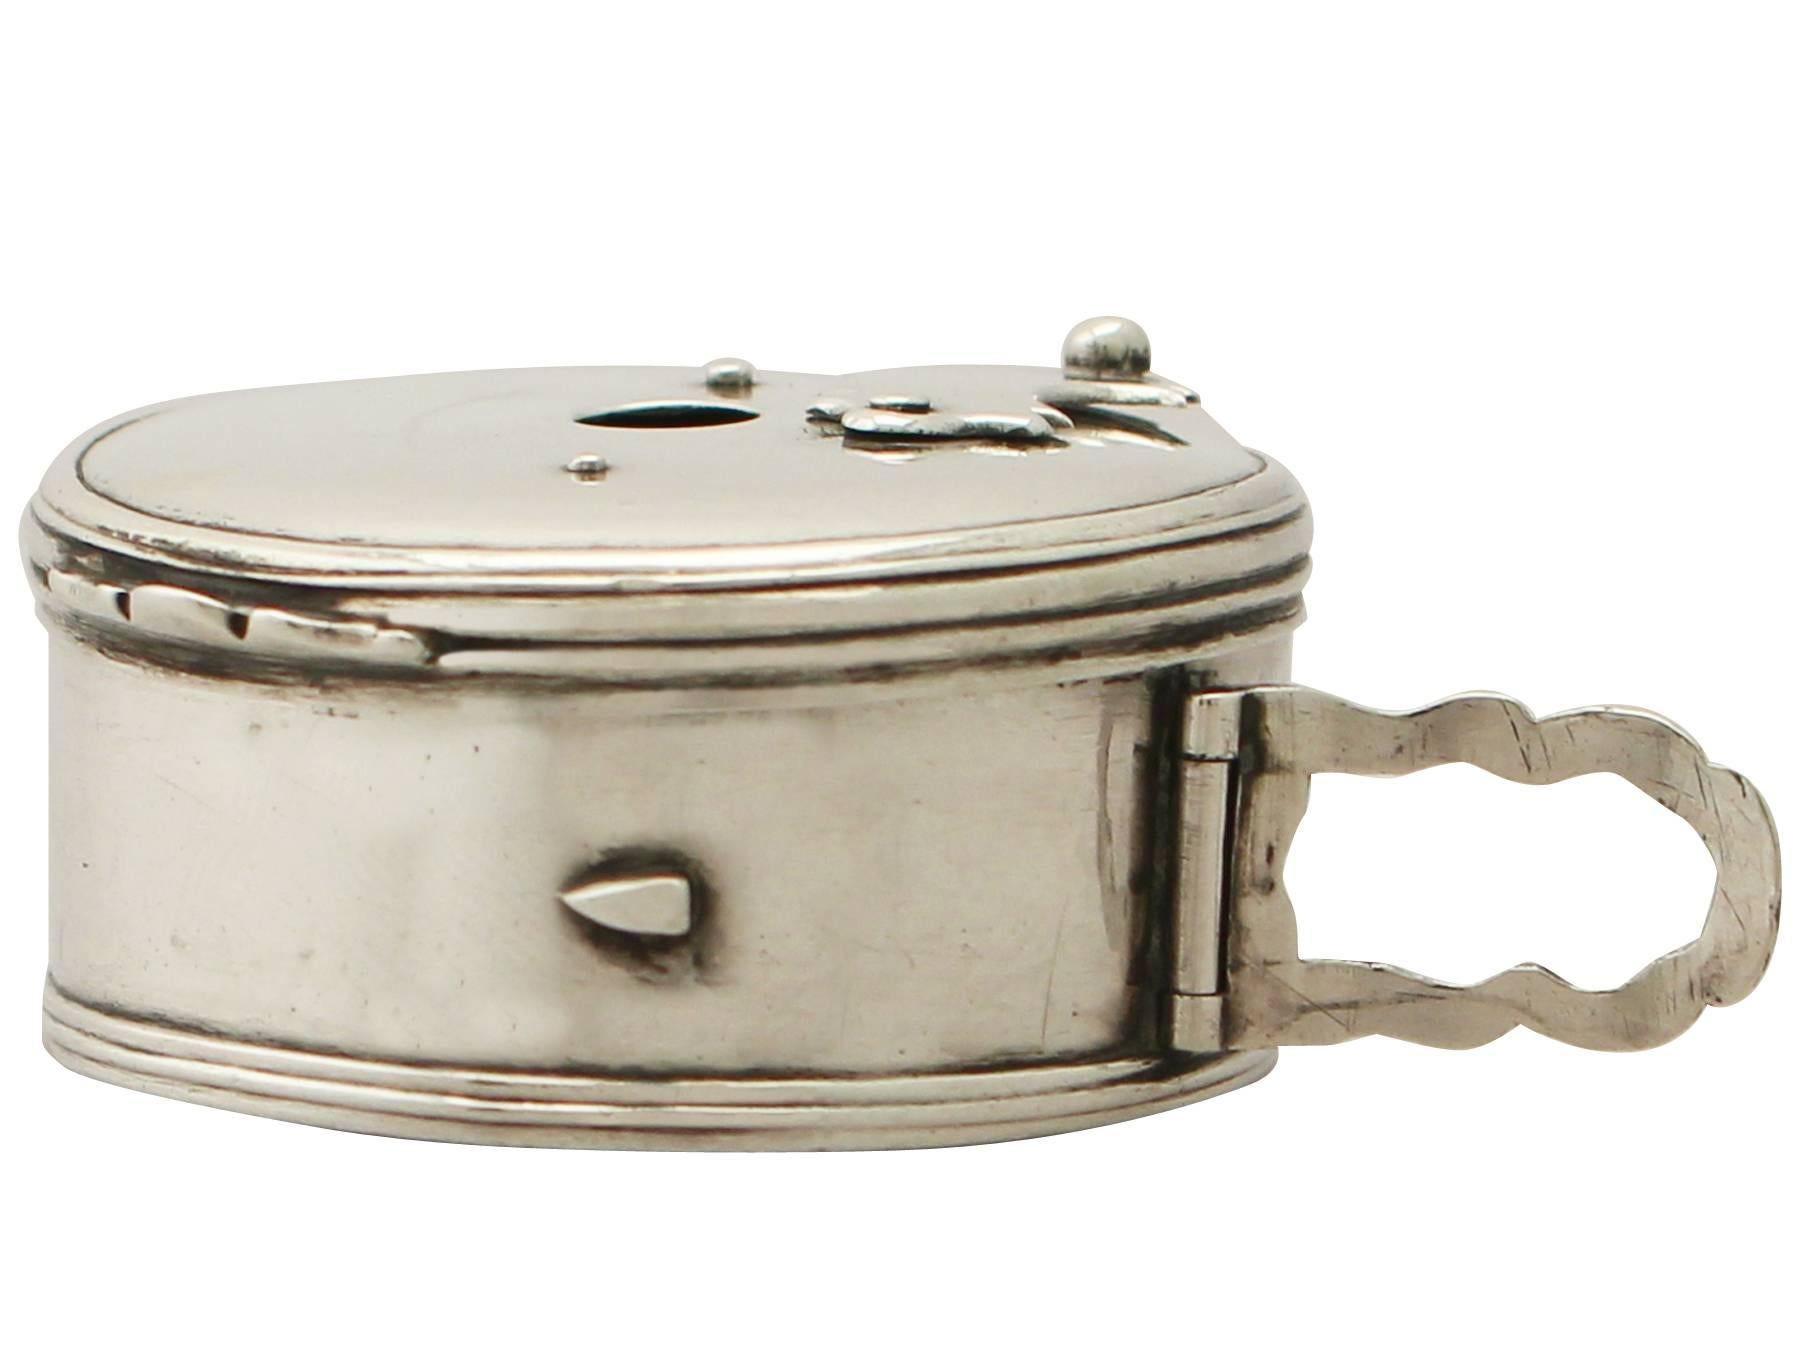 An exceptional, fine and impressive antique Georgian English sterling silver bougie box, an addition to our 18th century silverware collection.

Description.

This exceptional antique George III sterling silver bougie box has a circular rounded